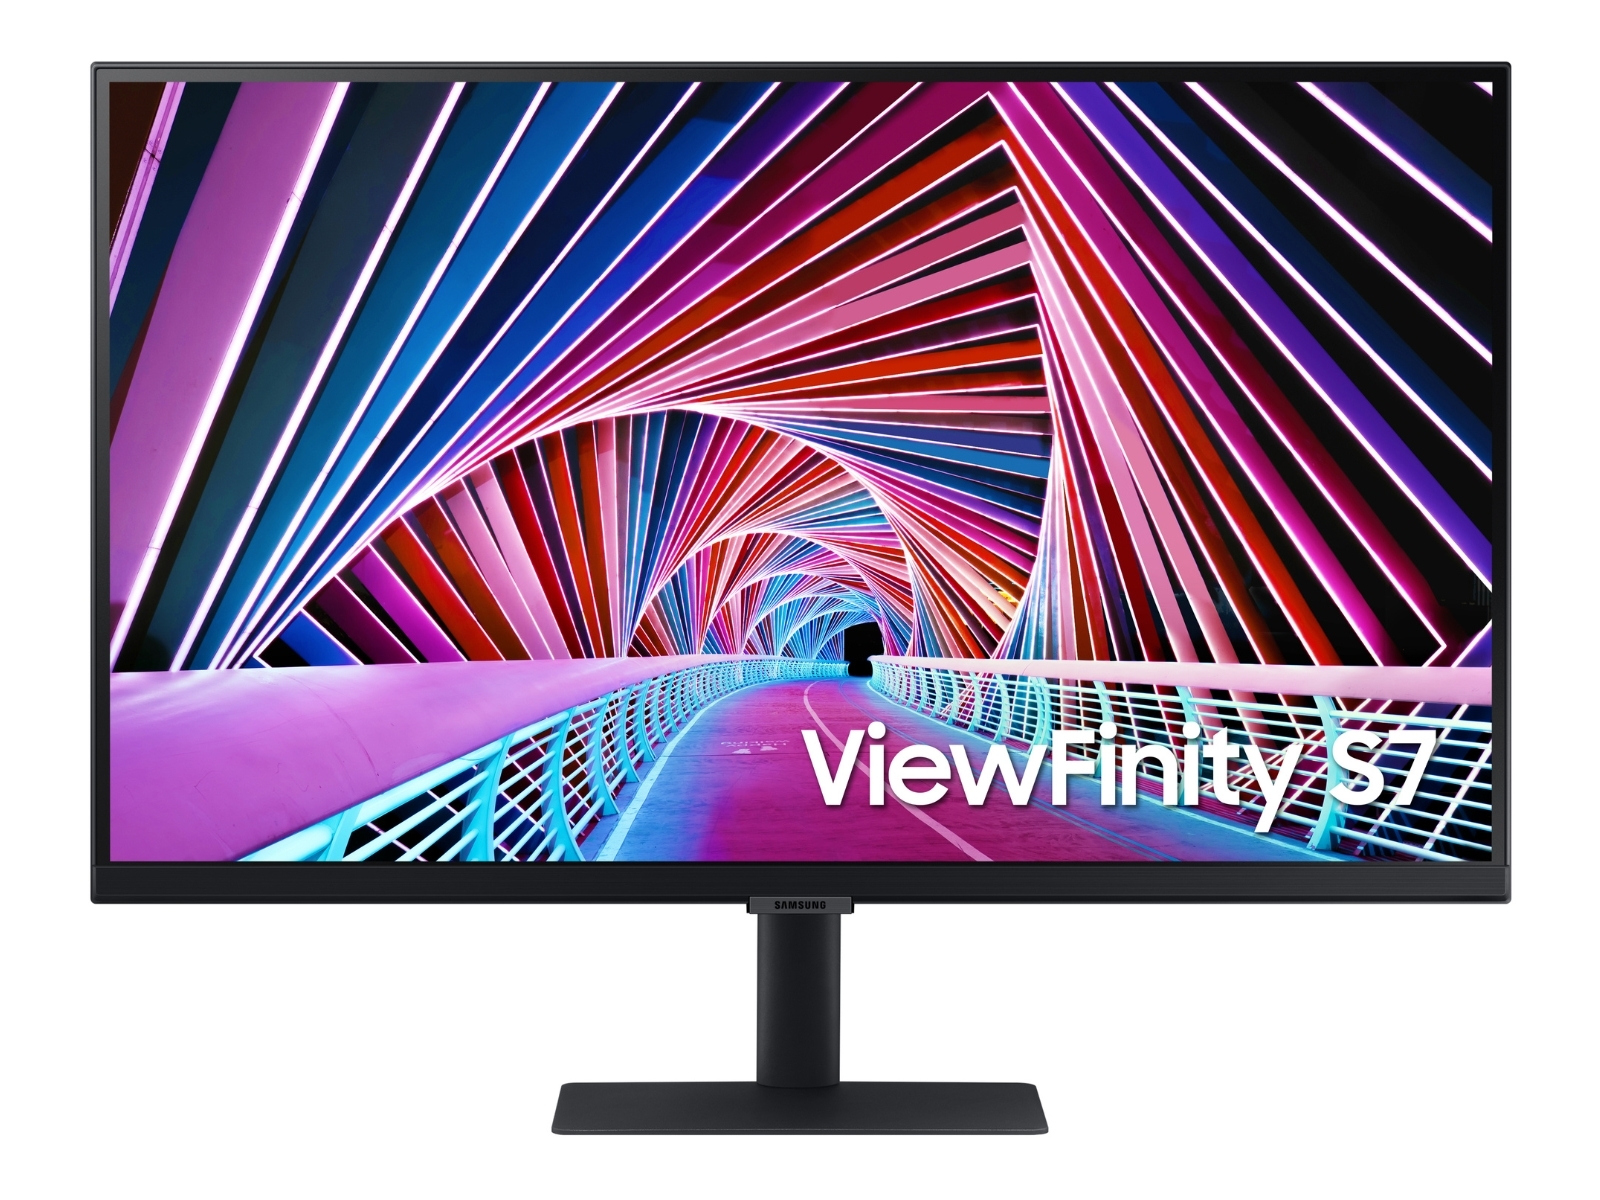 Samsung 27" ViewFinity S70A 4K UHD High Resolution Monitor in black(LS27A700NWNXZA)